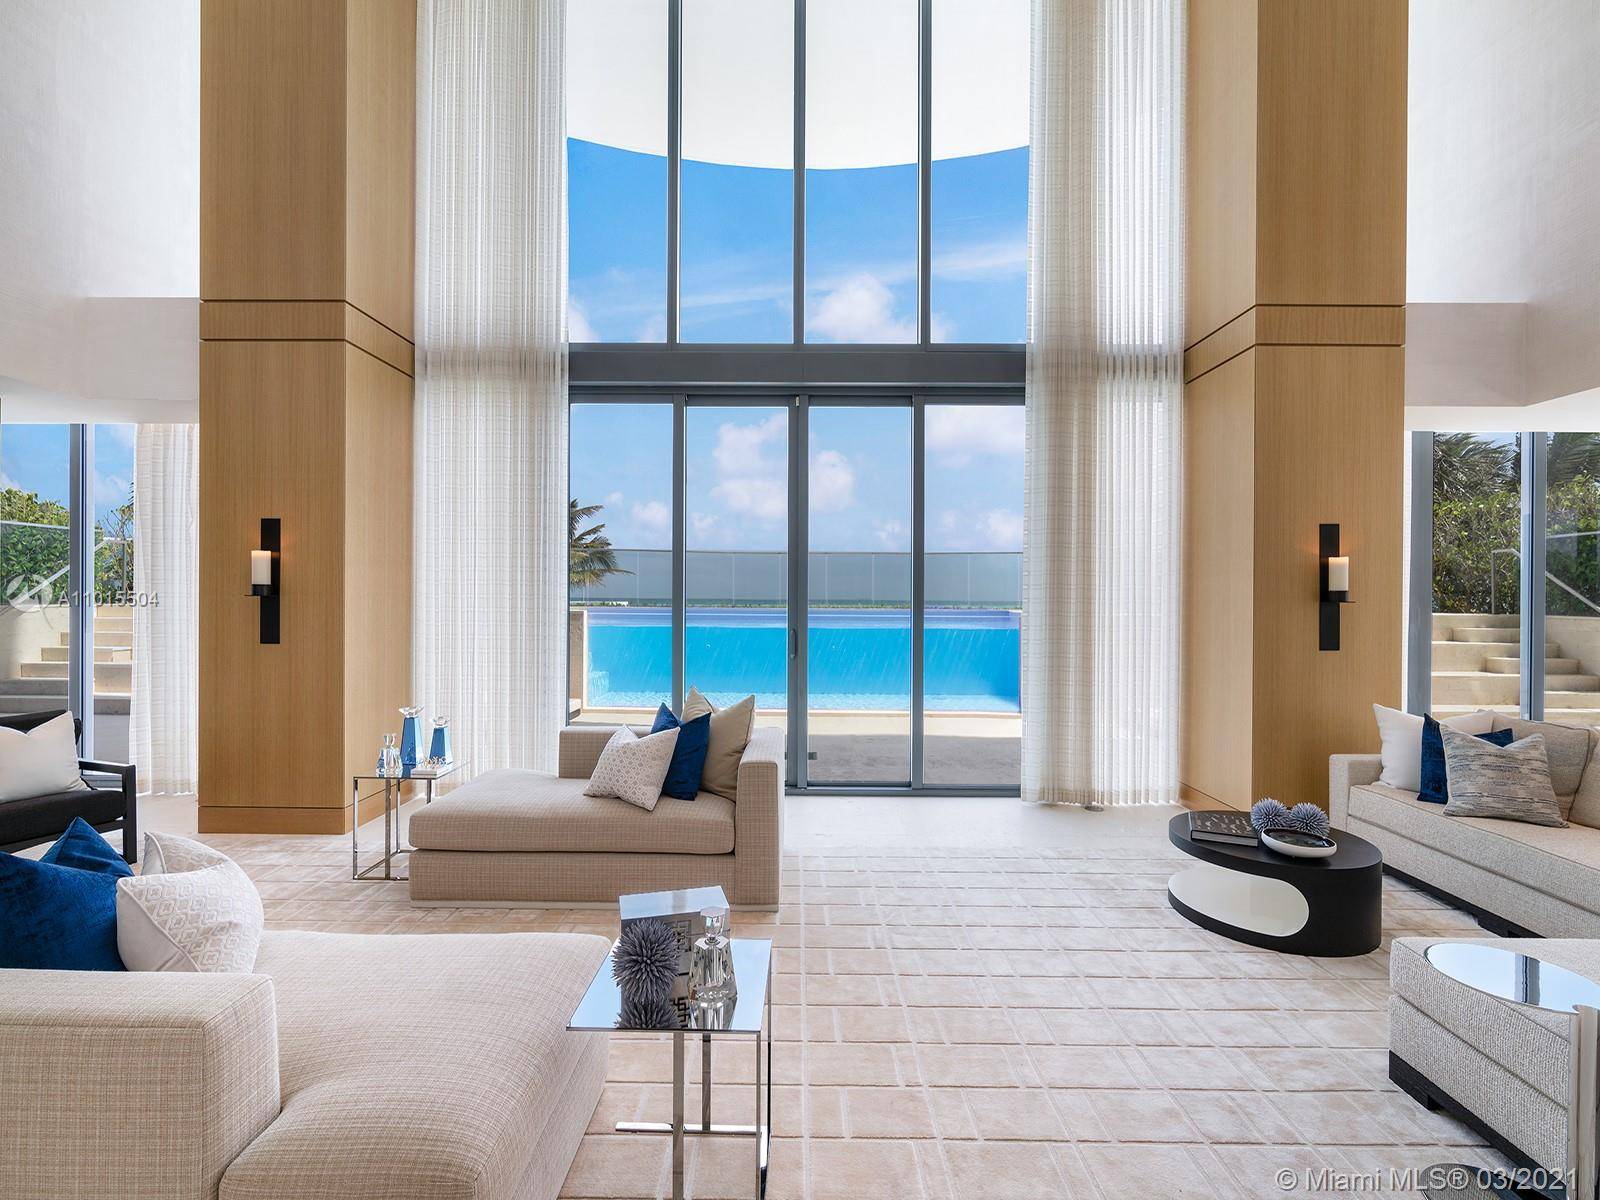 The Beach House at Regalia Sunny Isles is a lavish oceanfront residence at the scale of a private estate home, with all the conveniences of an ultra luxury condominium.